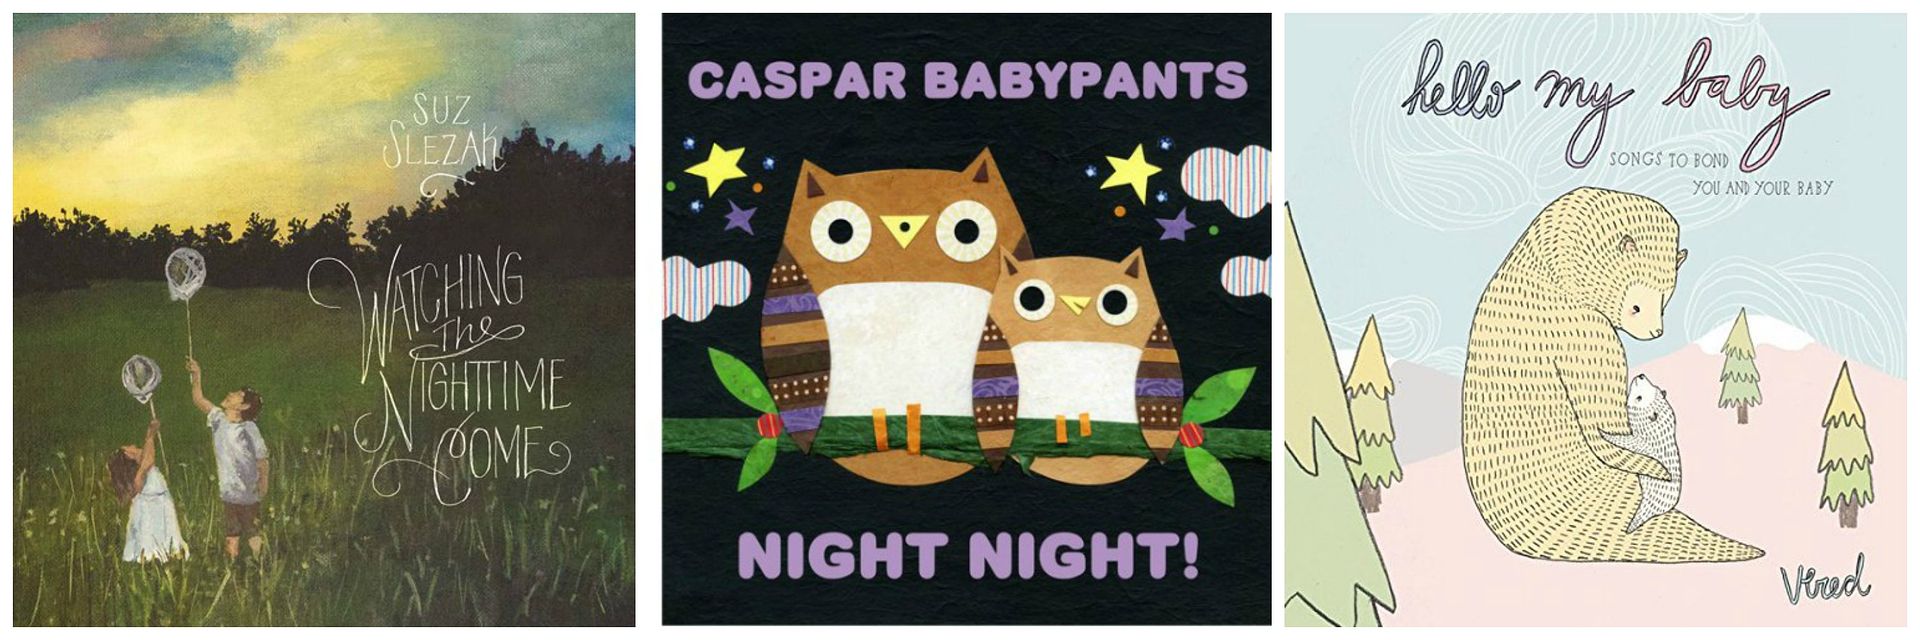 Baby registry gift ideas to help with sleep: Lullaby music CDs, like these from kindie artists Sue Slesak, Caspar Babypants, and Vered